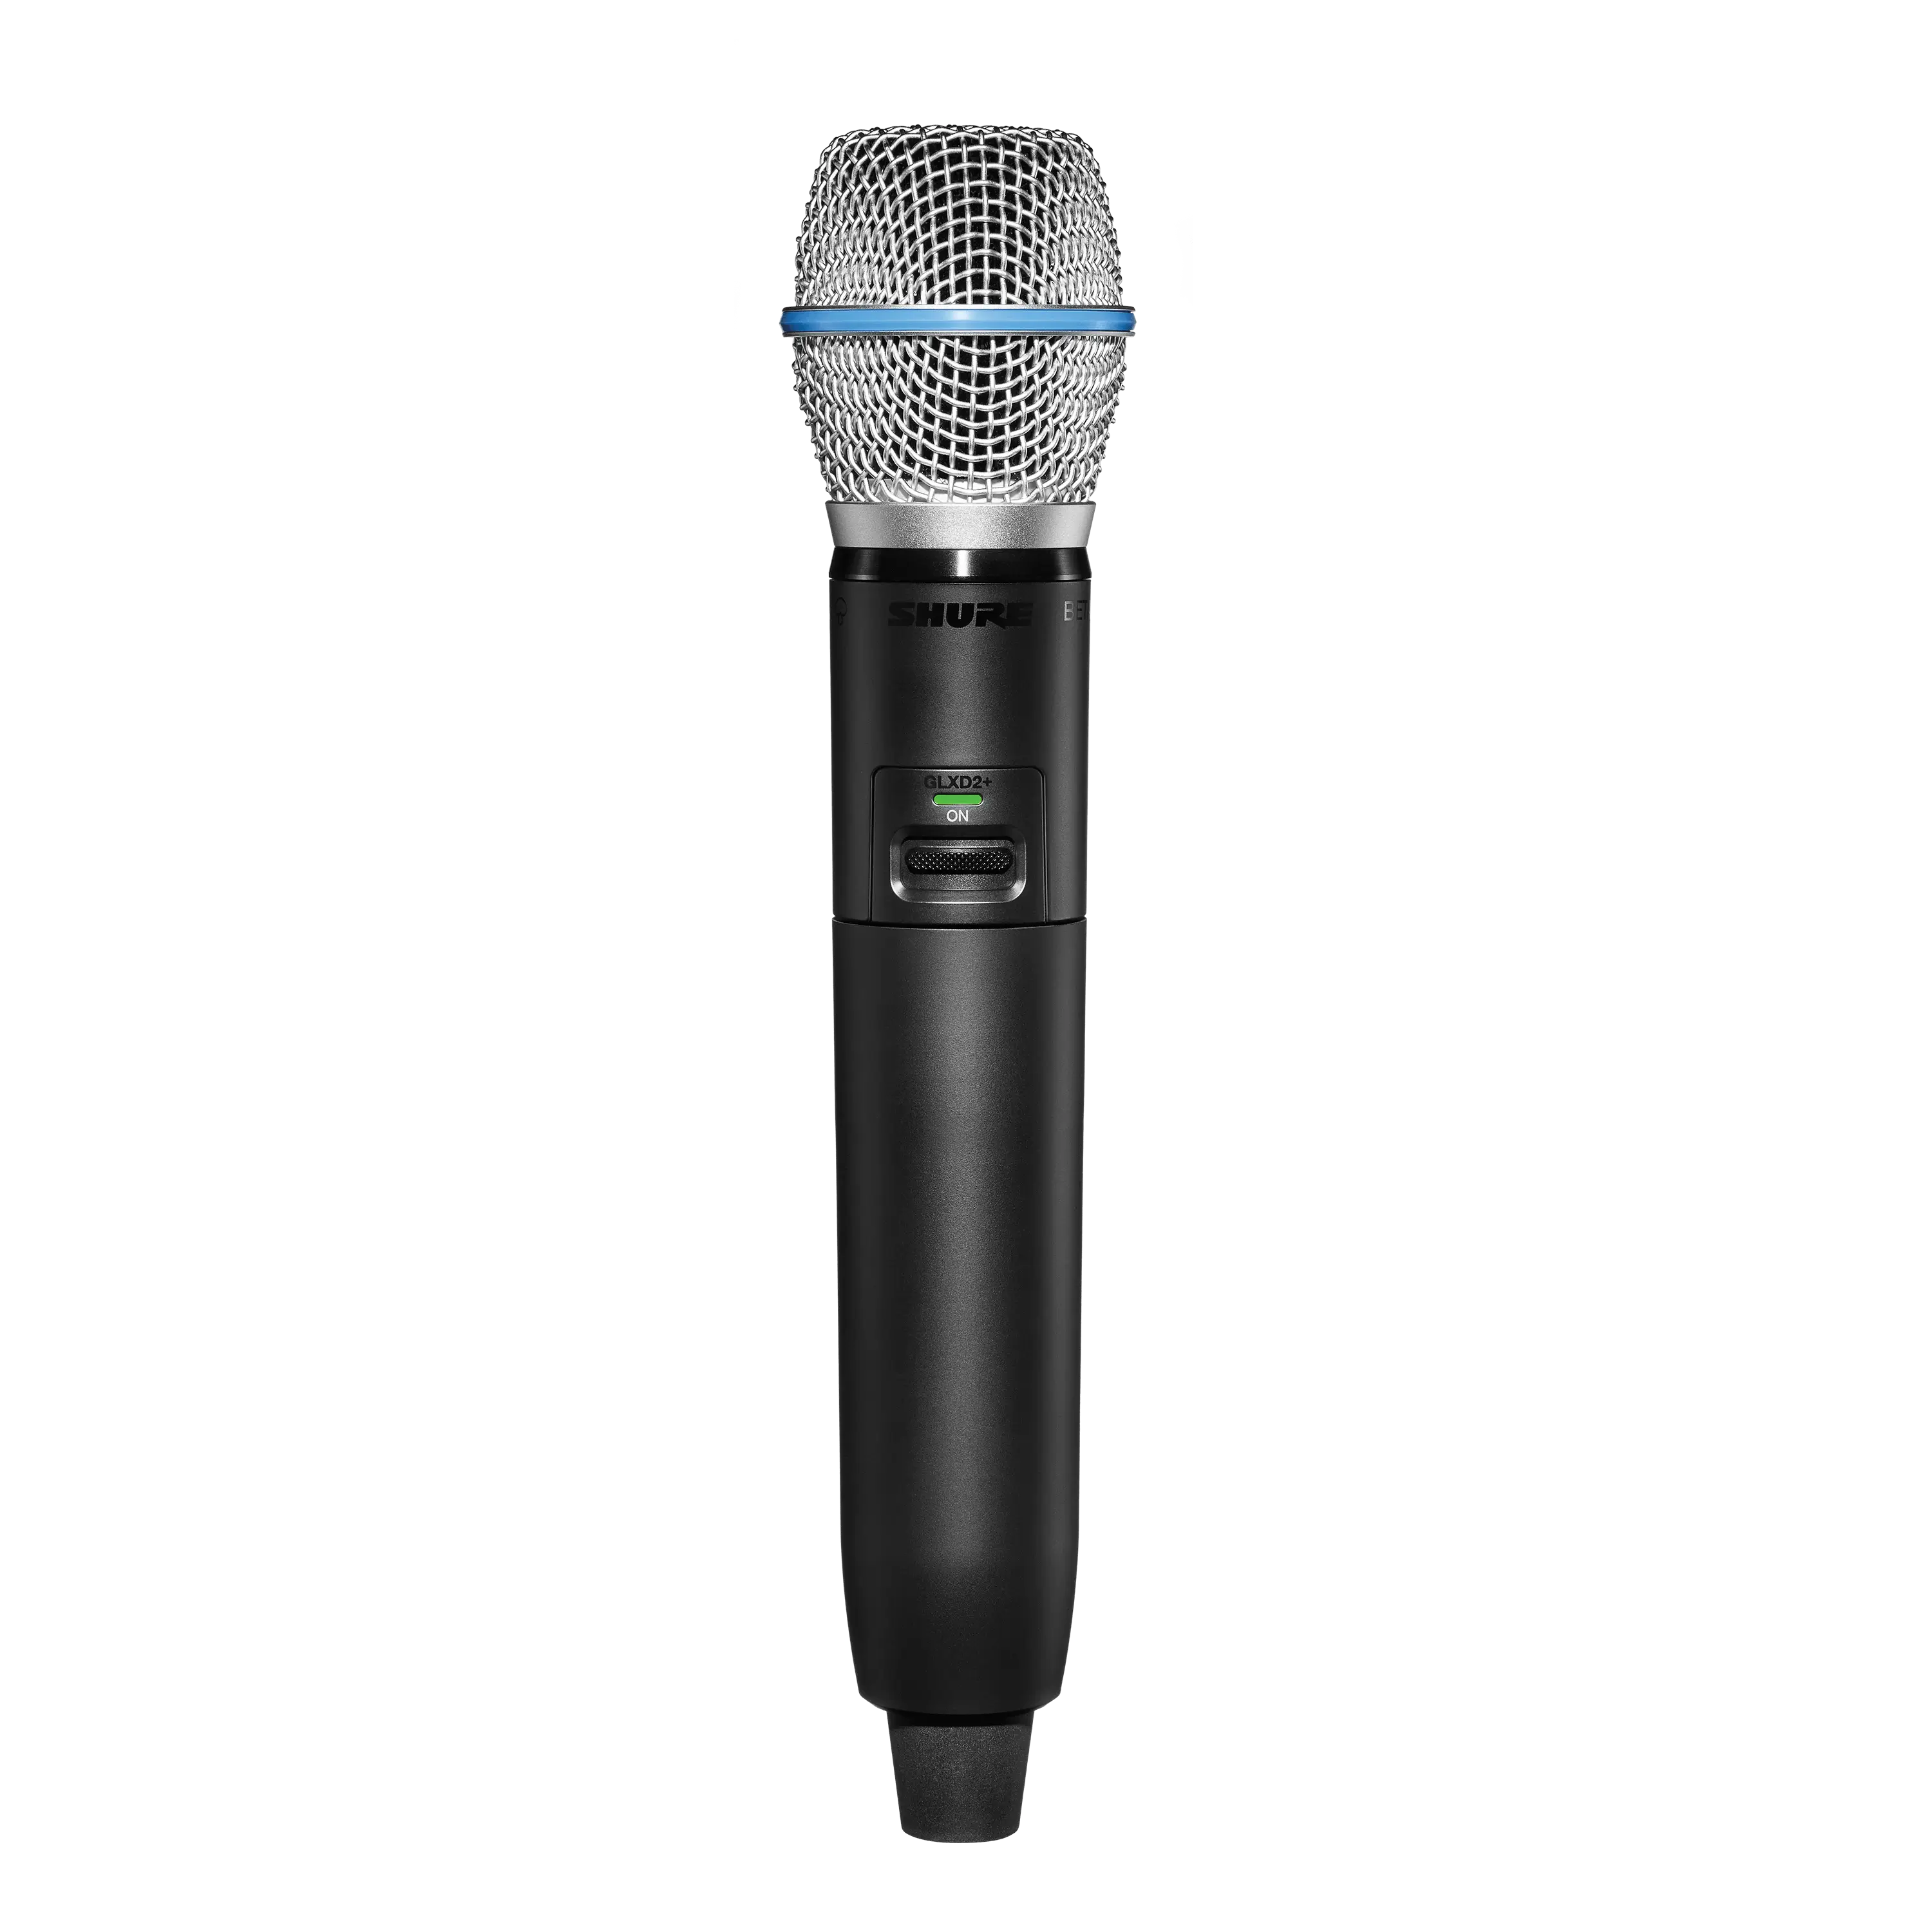 GLXD2+/B87A=-Z3 Digital Wireless Dual Band Handheld Transmitter with BETA 87A Vocal Microphone